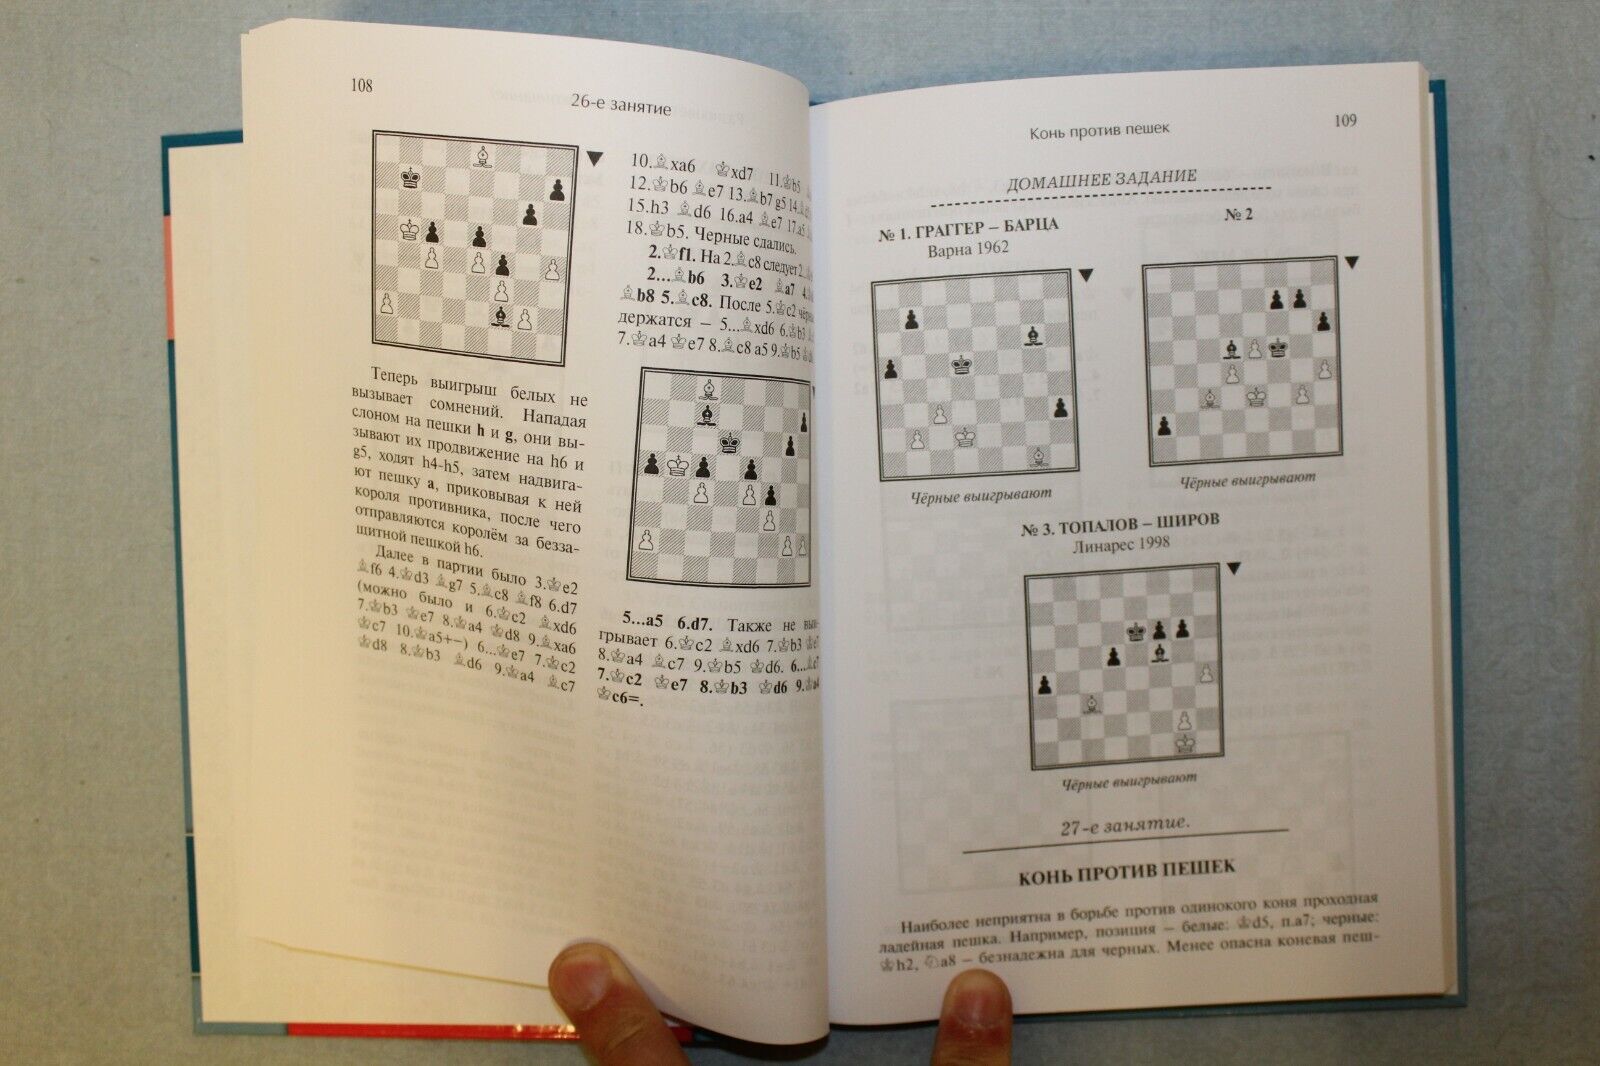 10667.2 Books by V. Golenischev. Training Programme for Skilled Chess Players